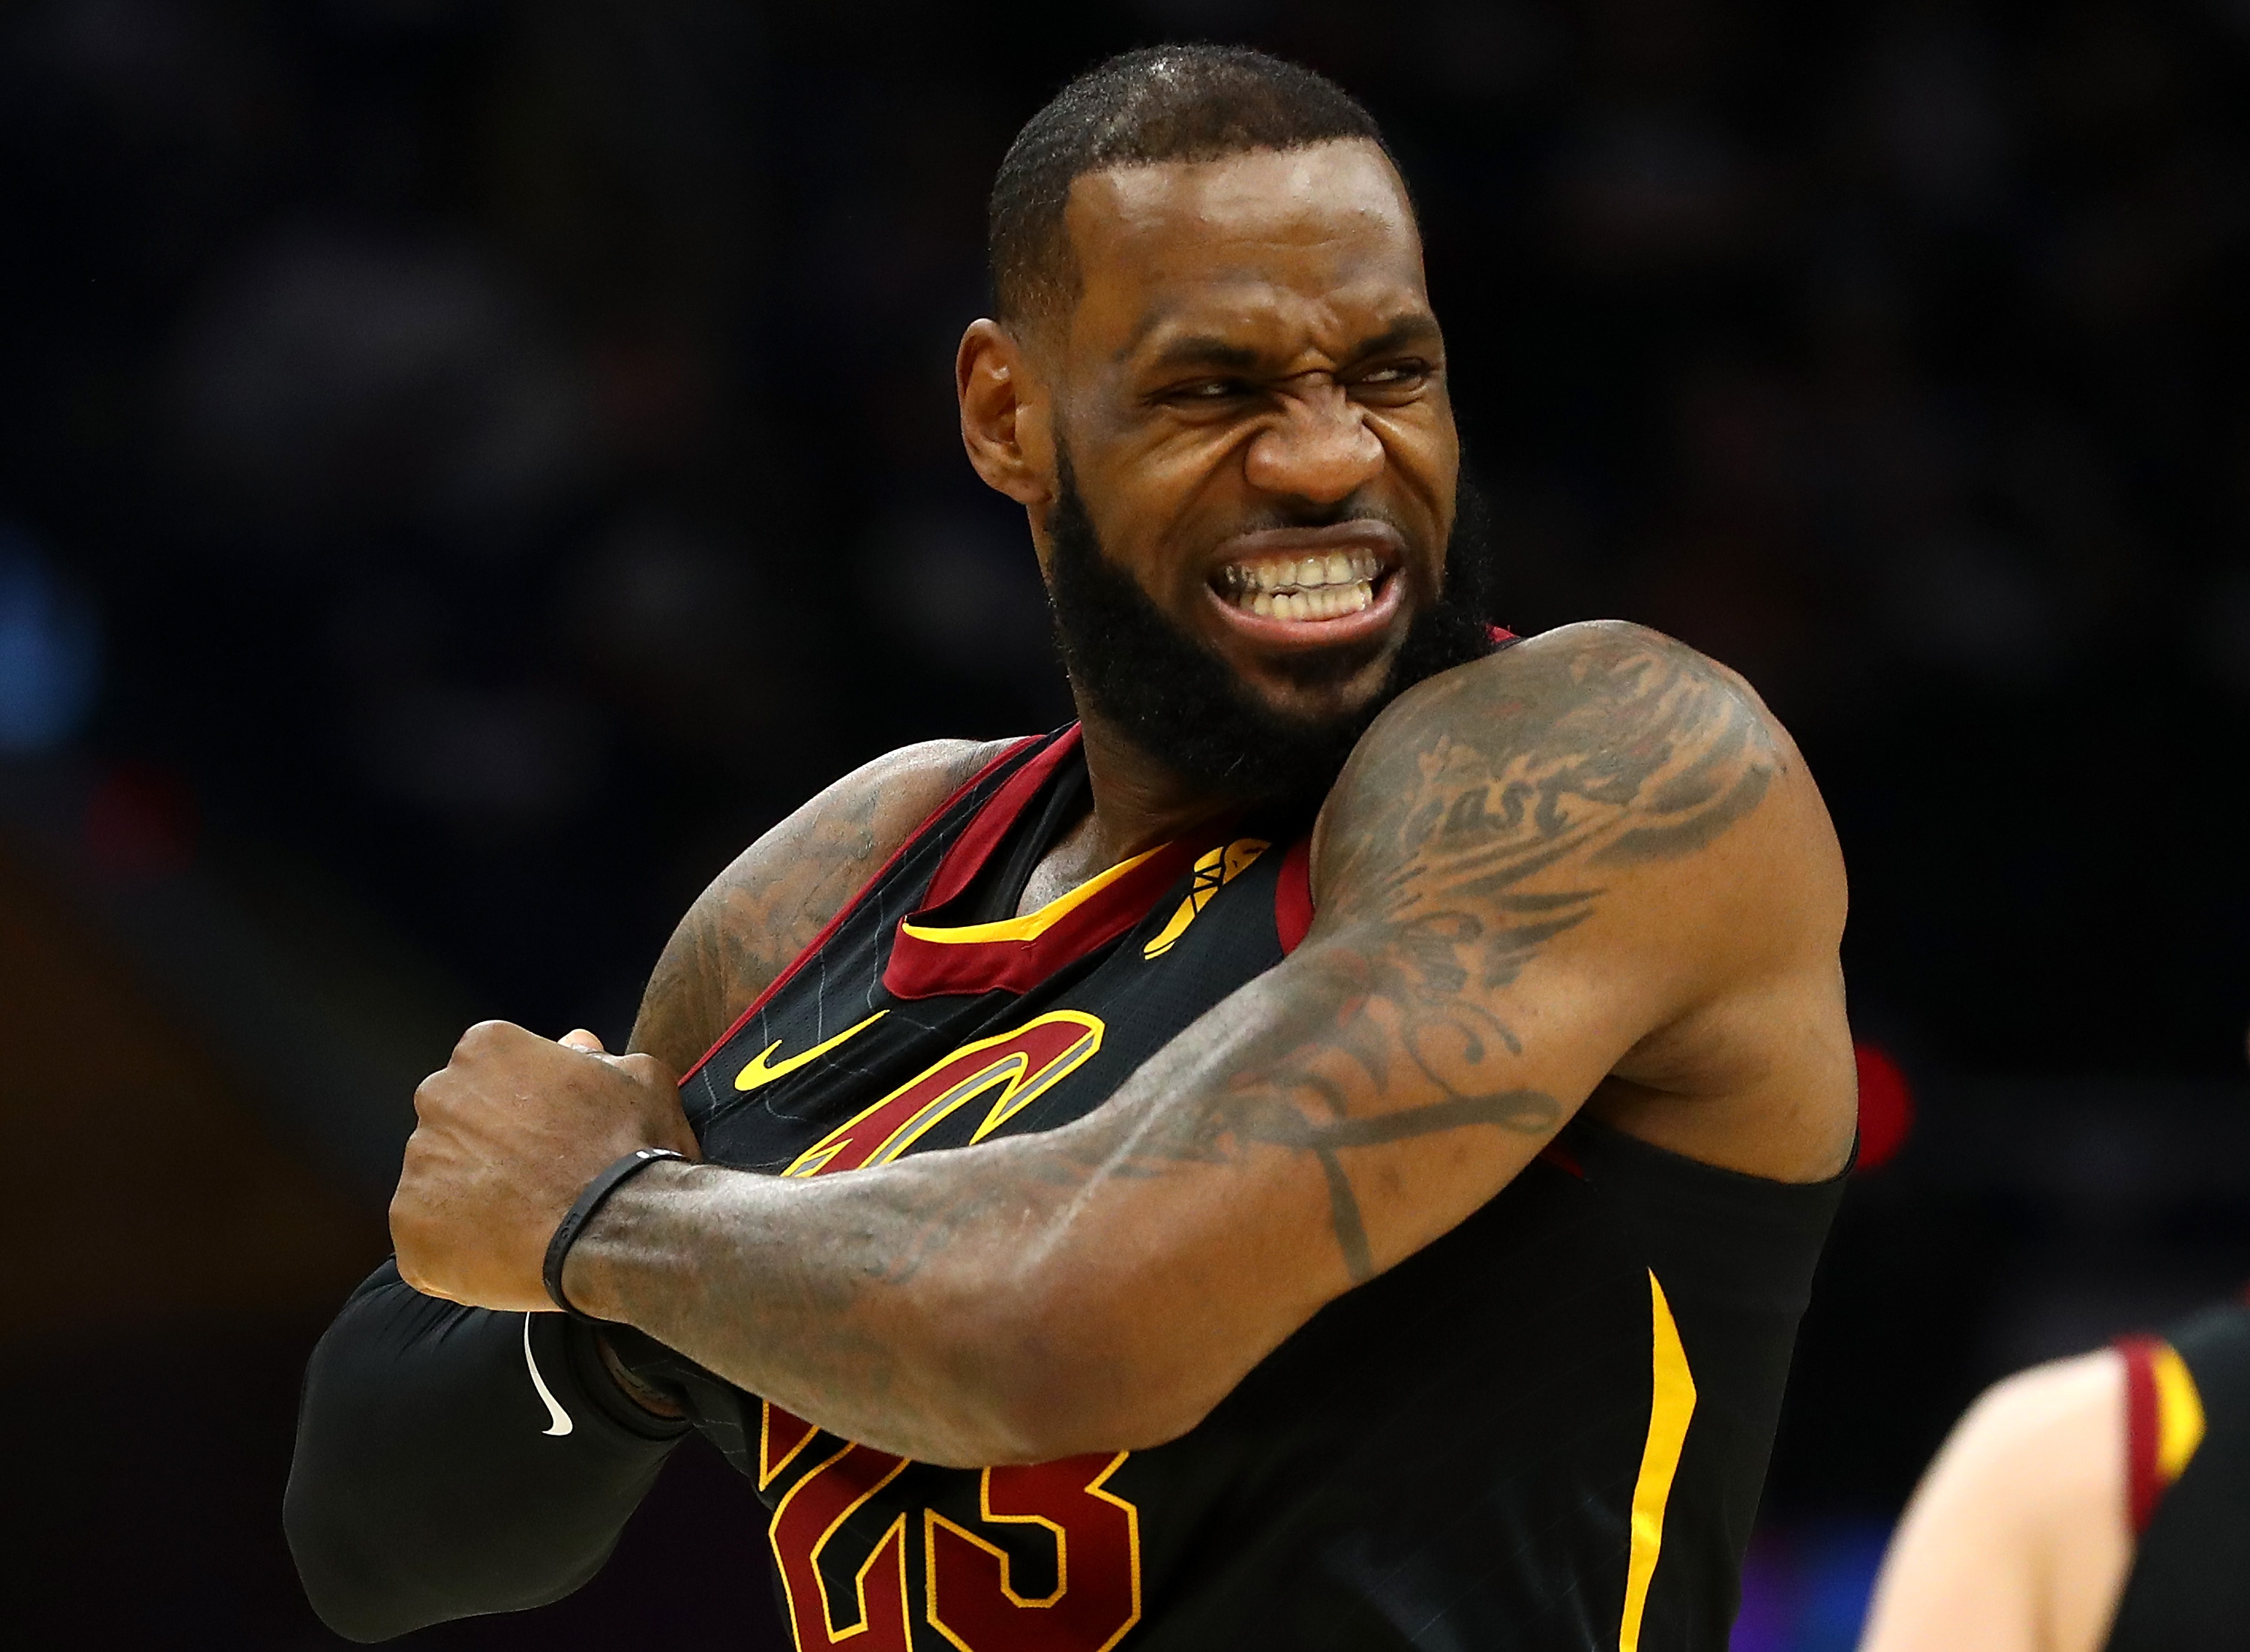 LeBron Opens First Round With Loss for First Time Ever - InsideHook